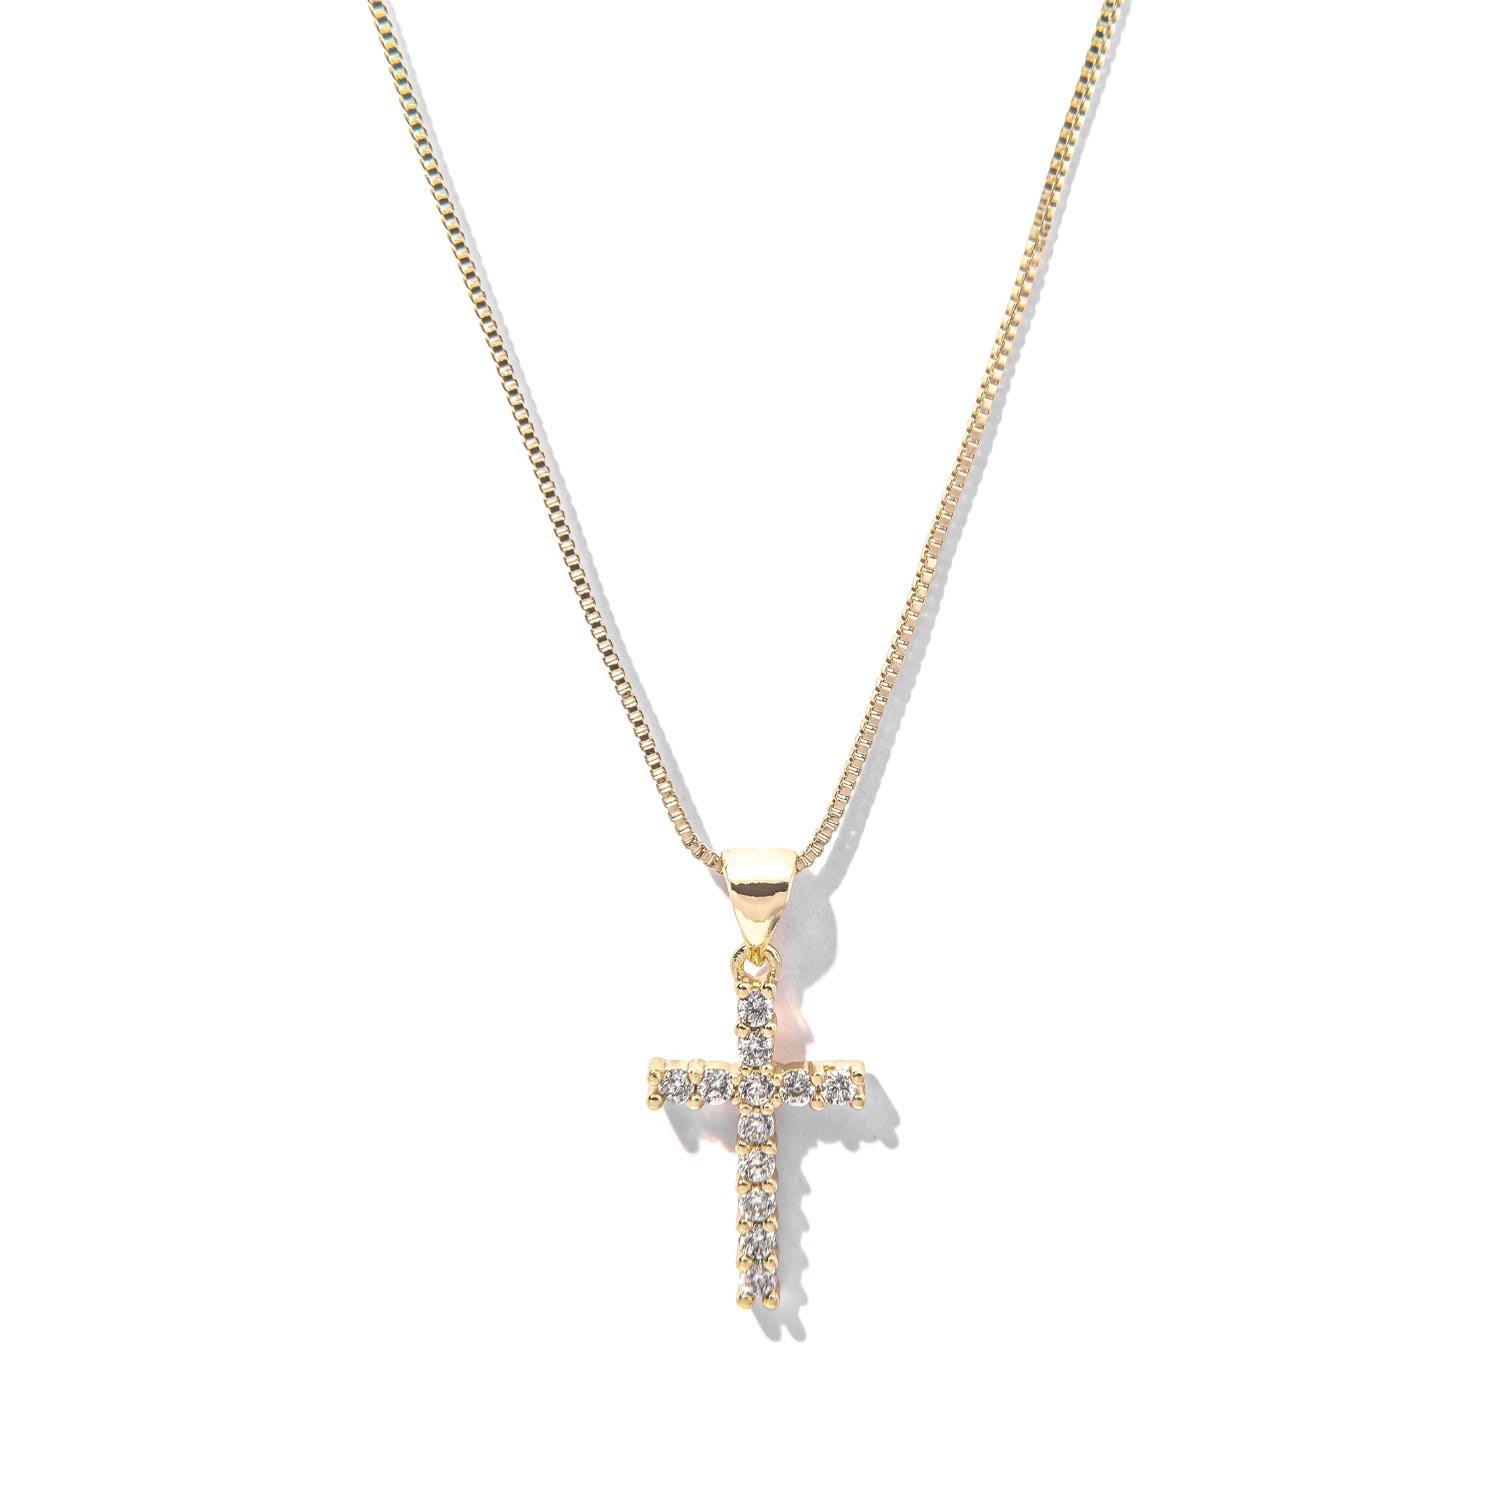 Women’s Gold Filled Mini Cross Box Chain Necklace The Essential Jewels